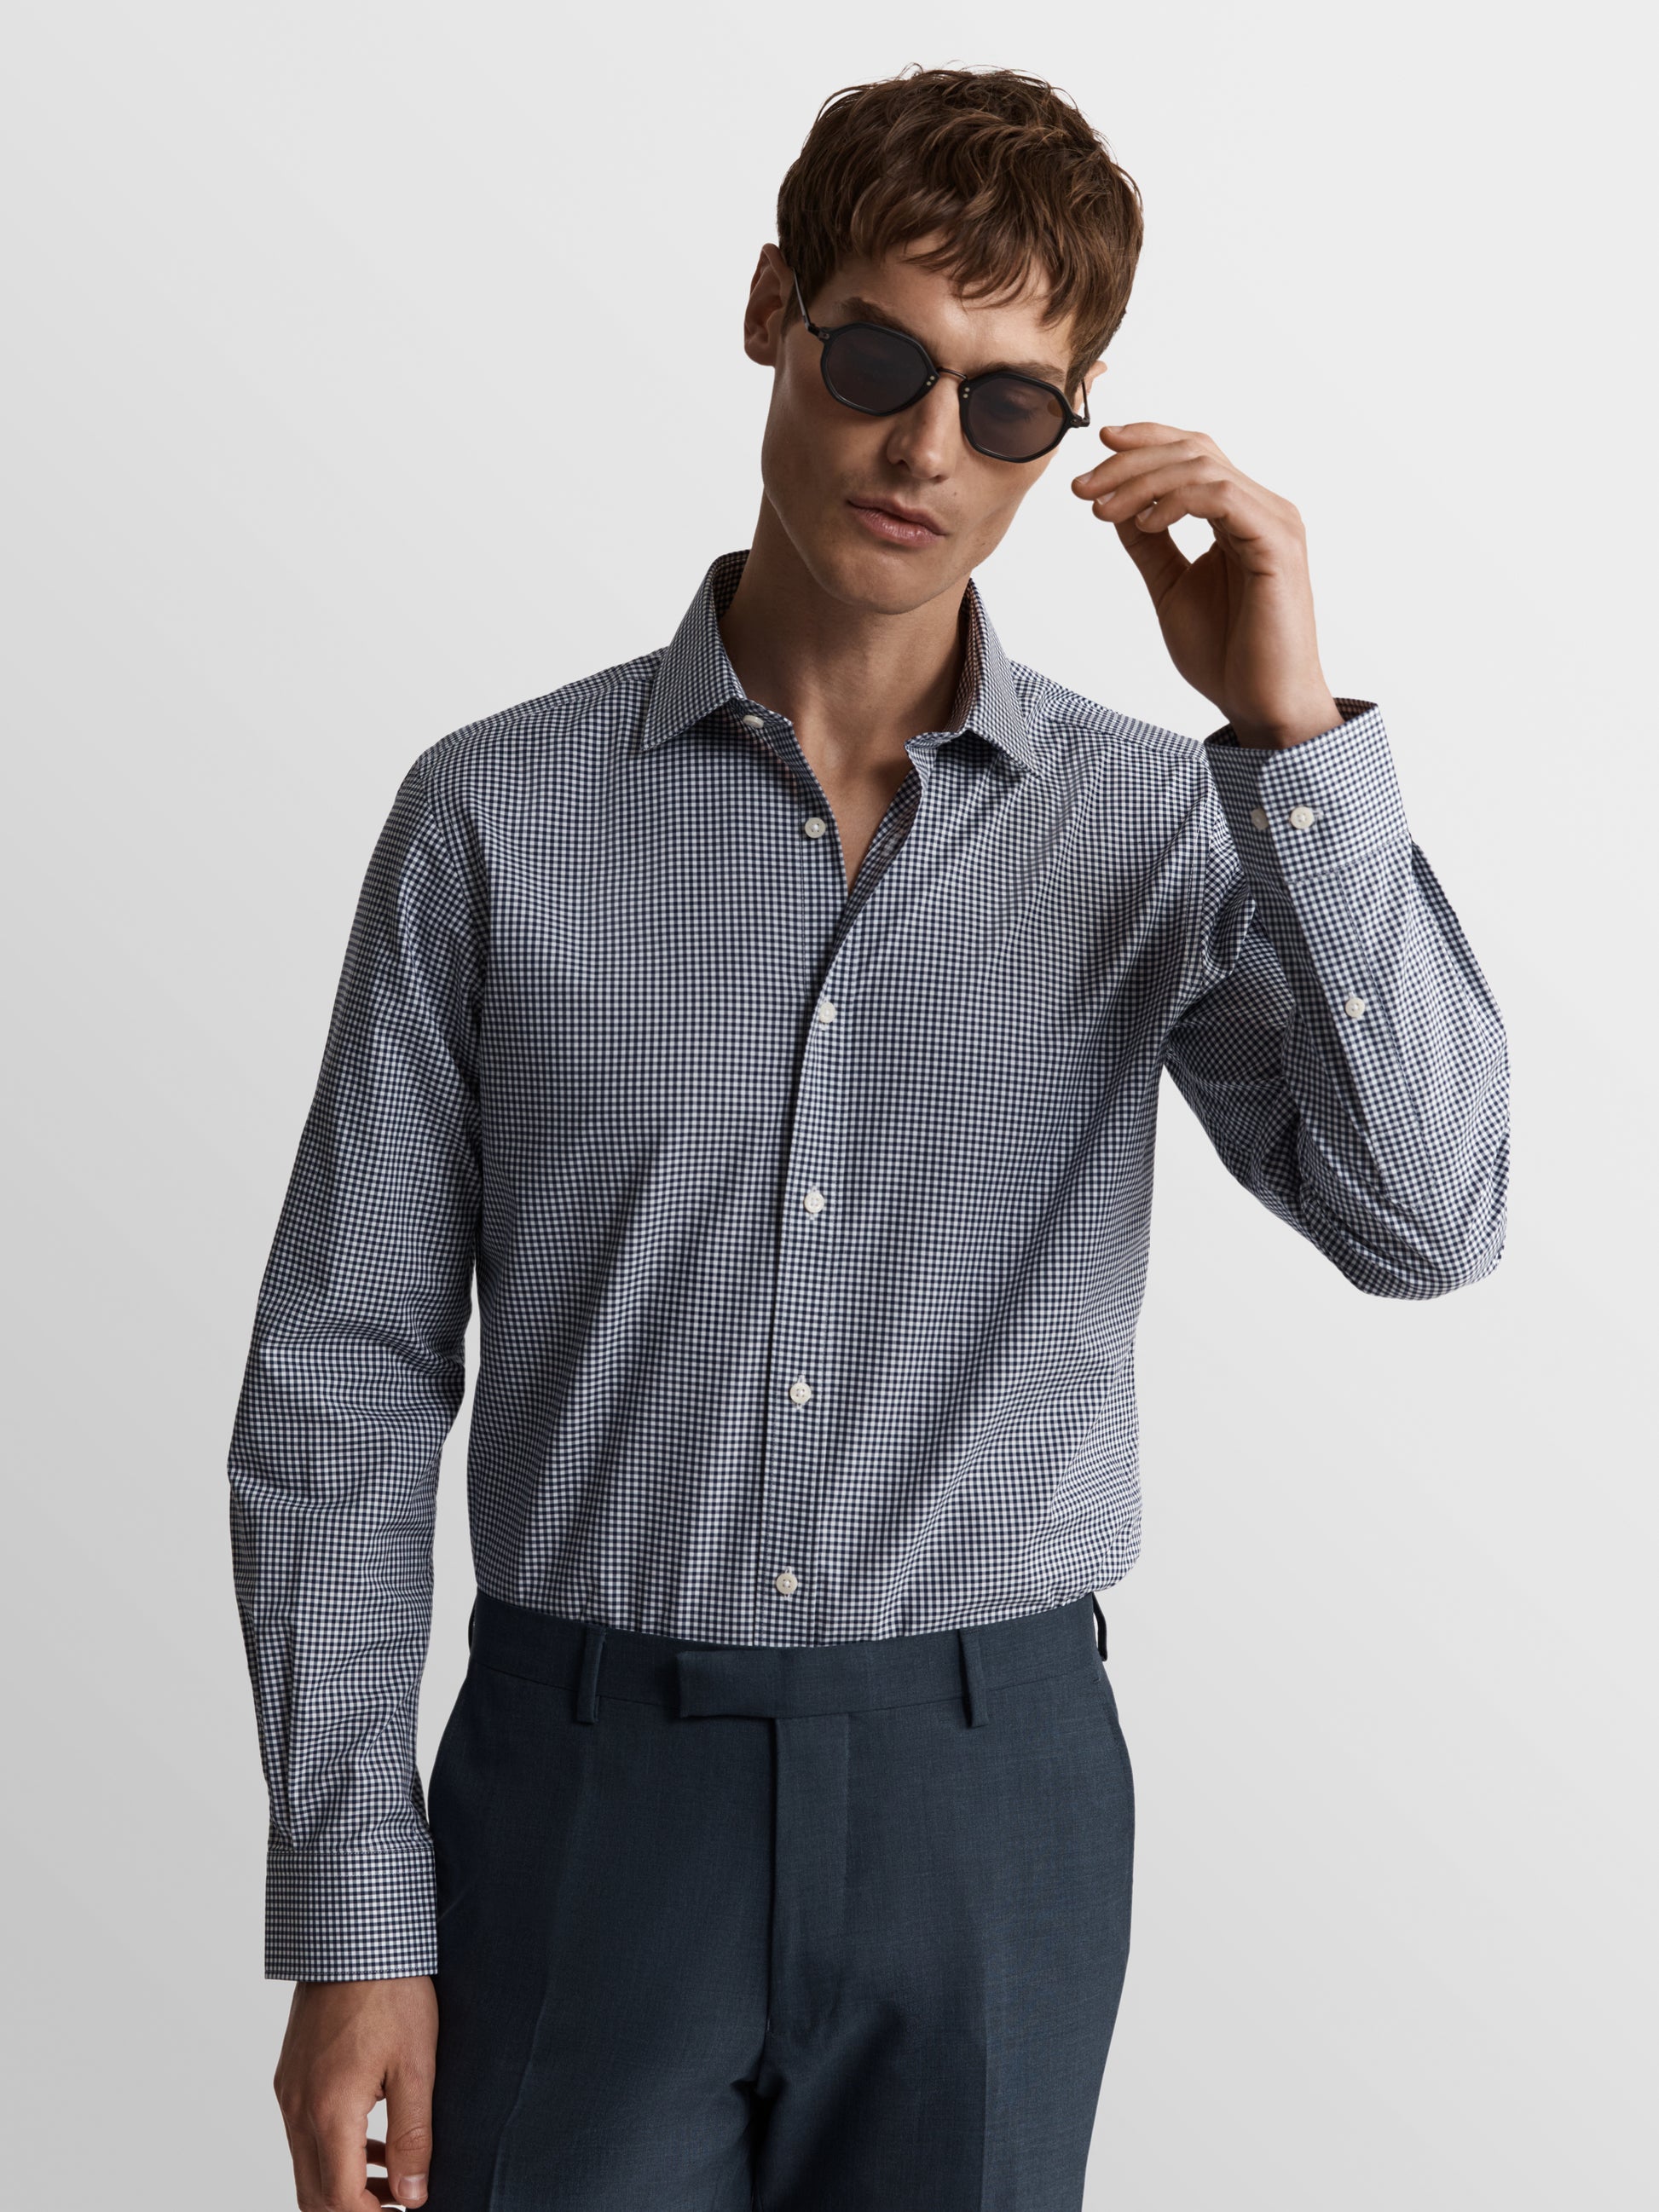 Image 1 of Max Performance Navy Blue Small Gingham Plain Weave Slim Fit Single Cuff Classic Collar Shirt